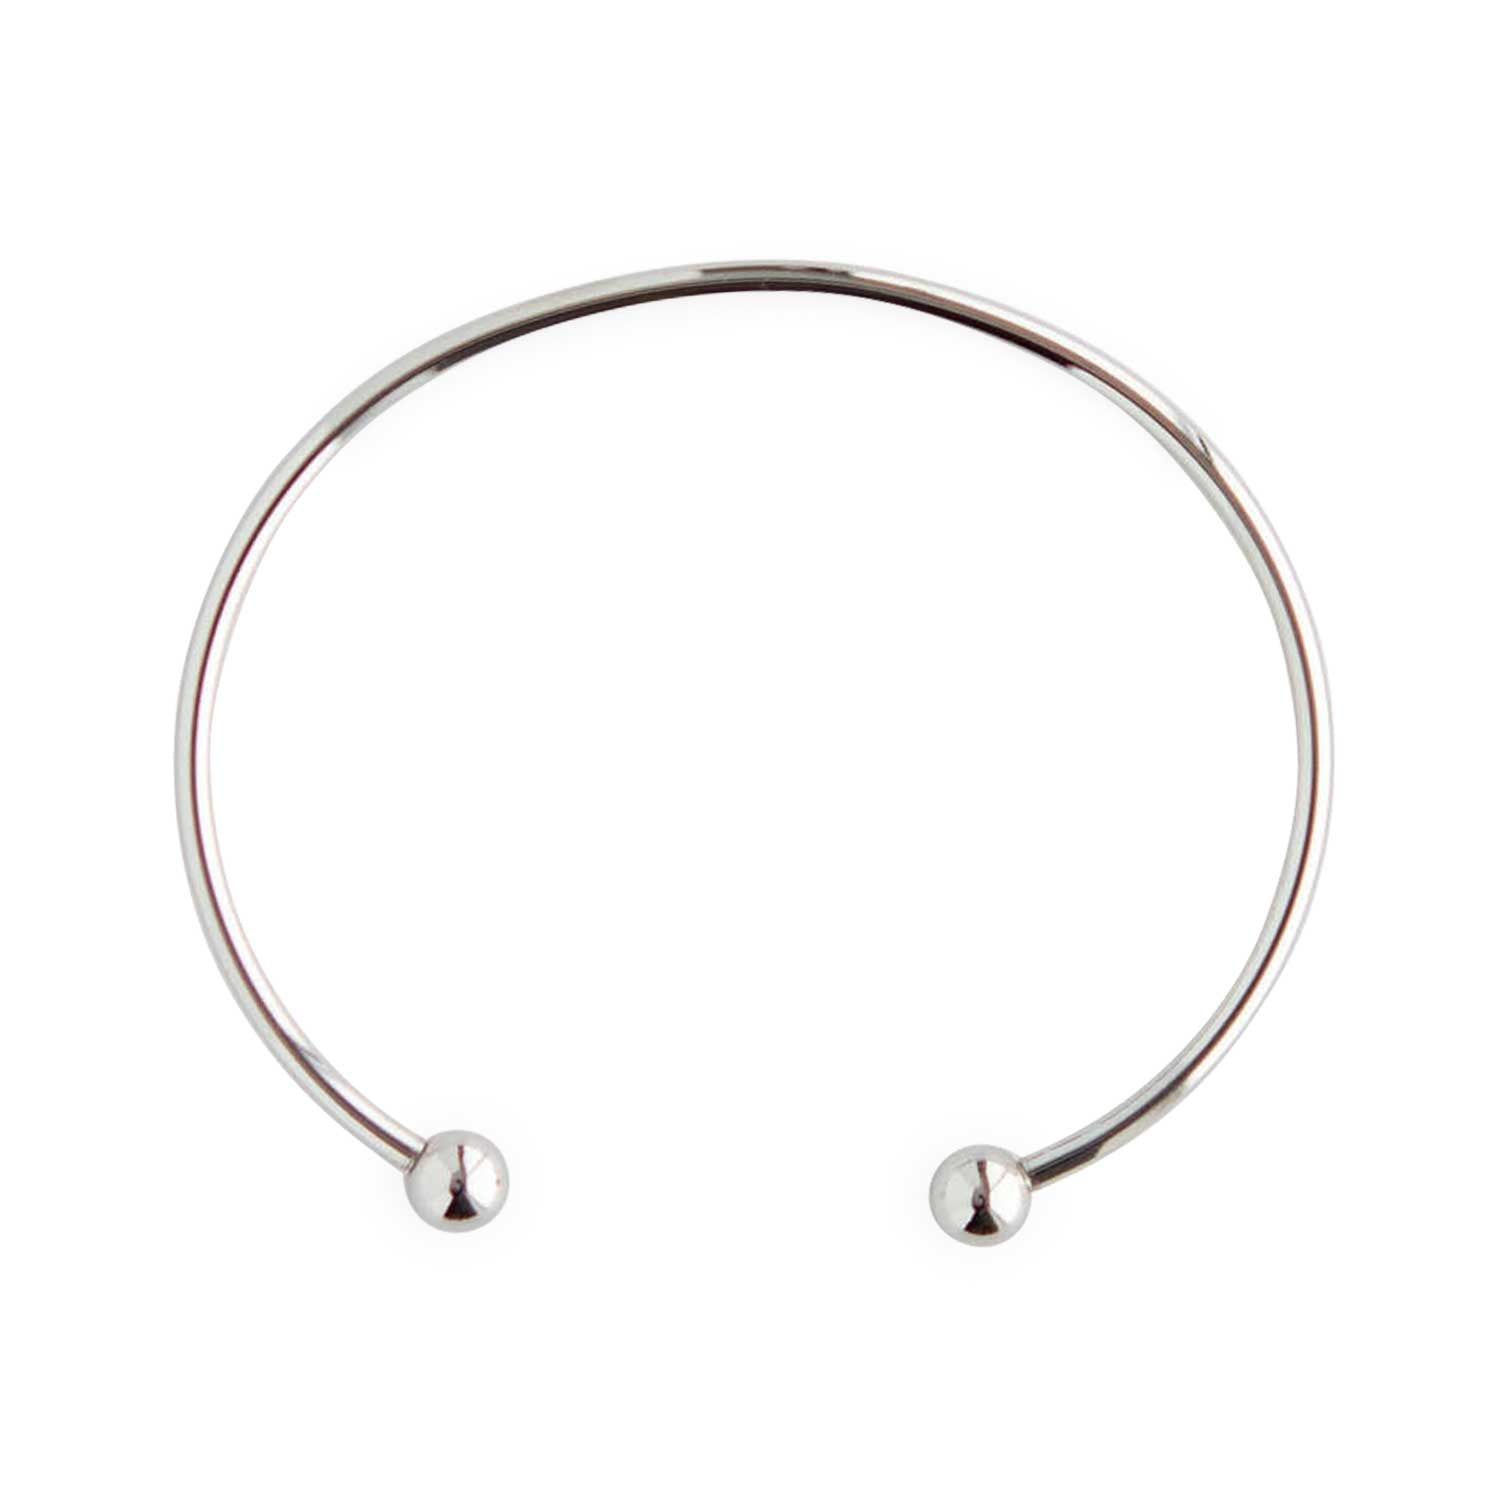 Beadables Bracelets Bangle - 2mm from Cara & Co Craft Supply